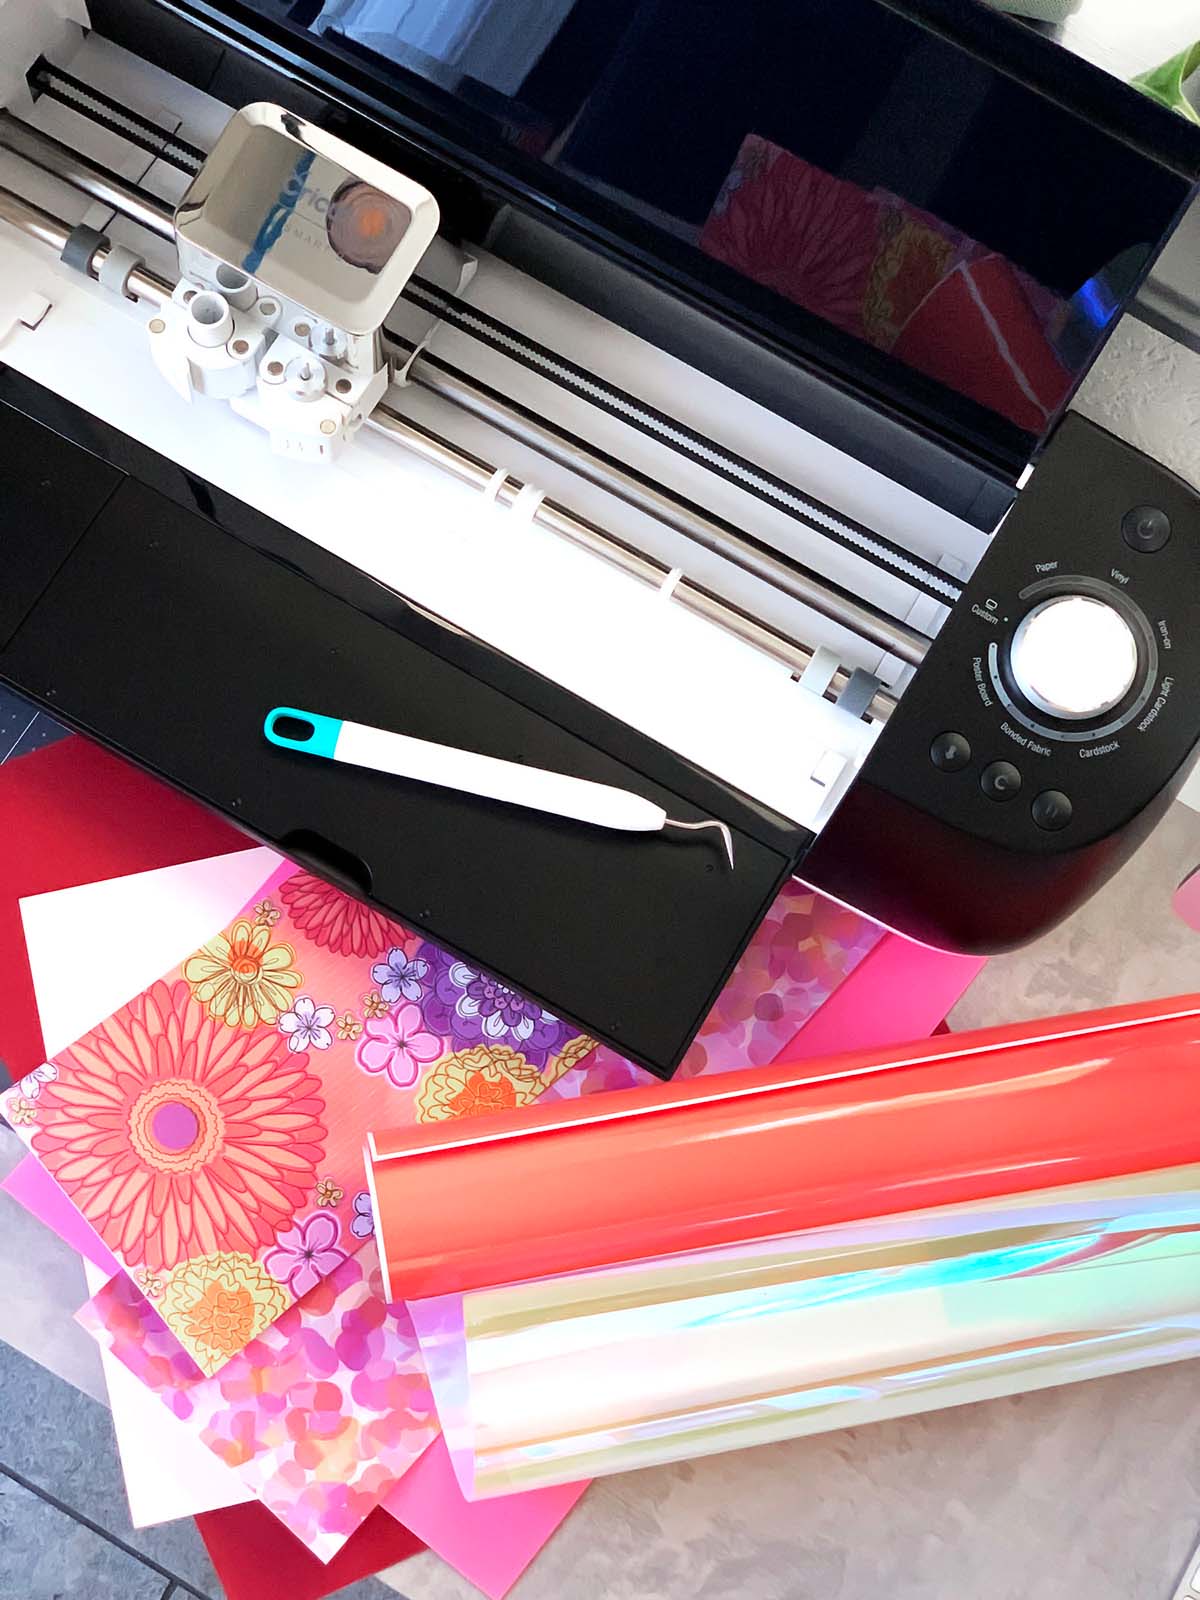 Make projects with your Cricut - what do you want to make first?